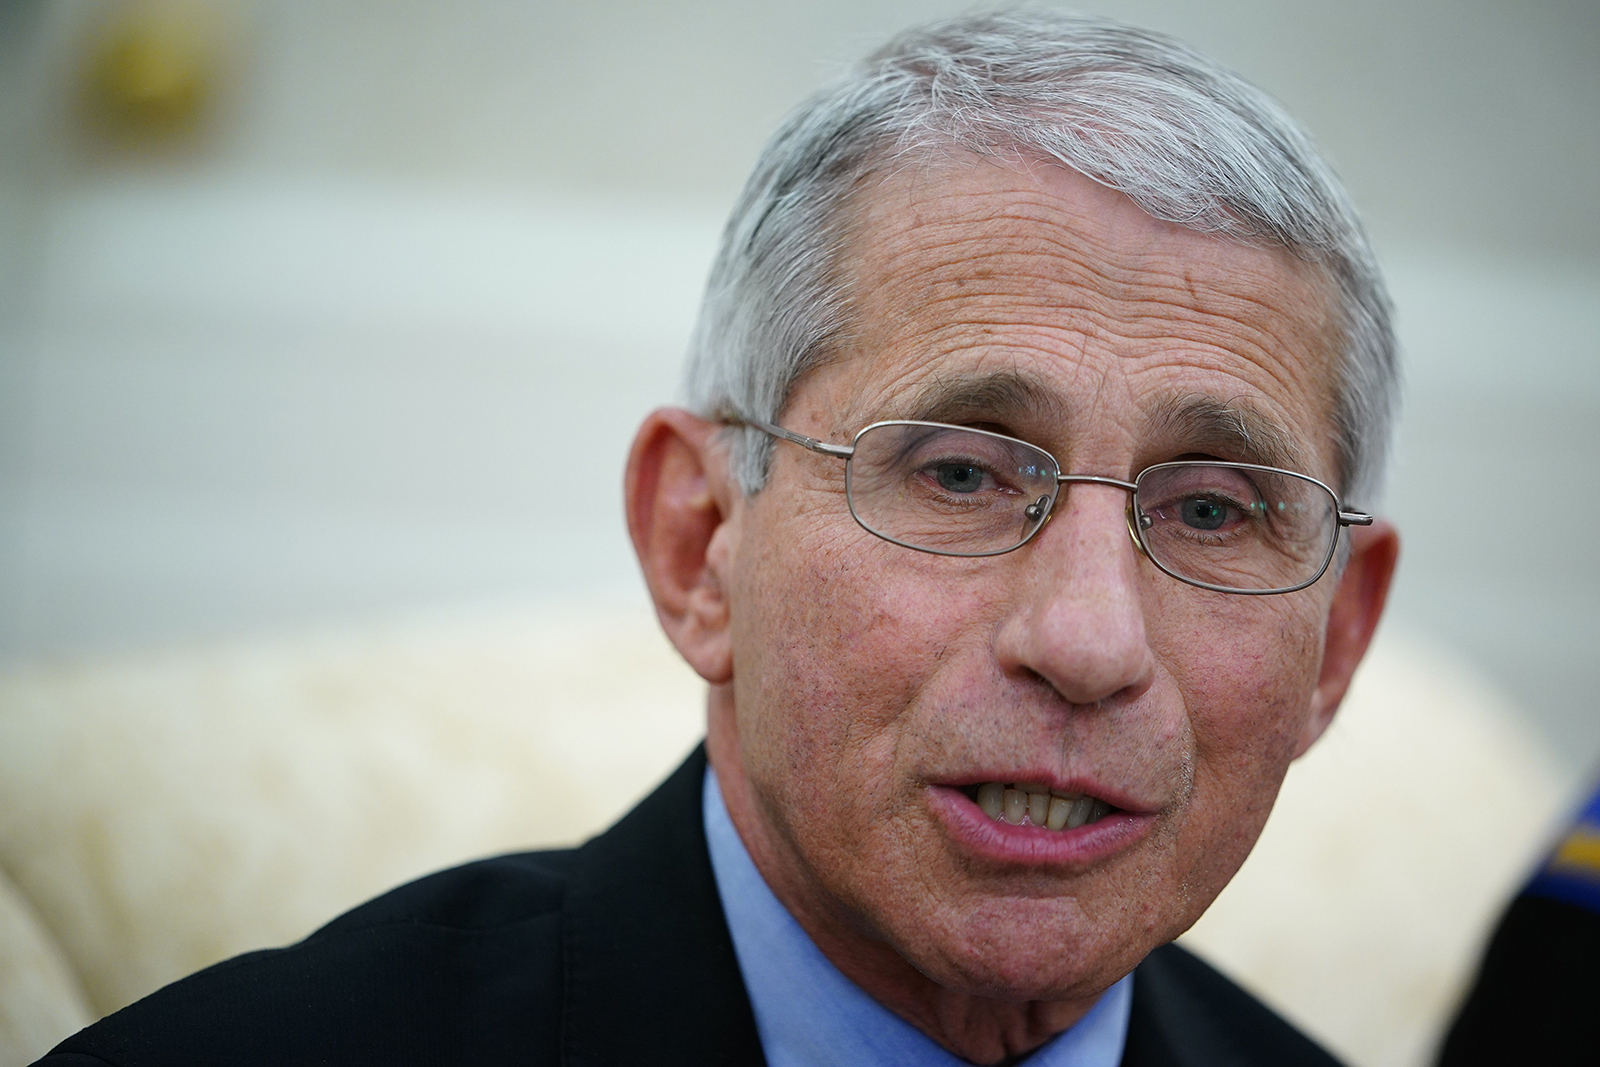 Dr. Anthony Fauci, director of the National Institute of Allergy and Infectious Diseases speaks during a meeting in the Oval Office of the White House in Washington, DC on April 29.